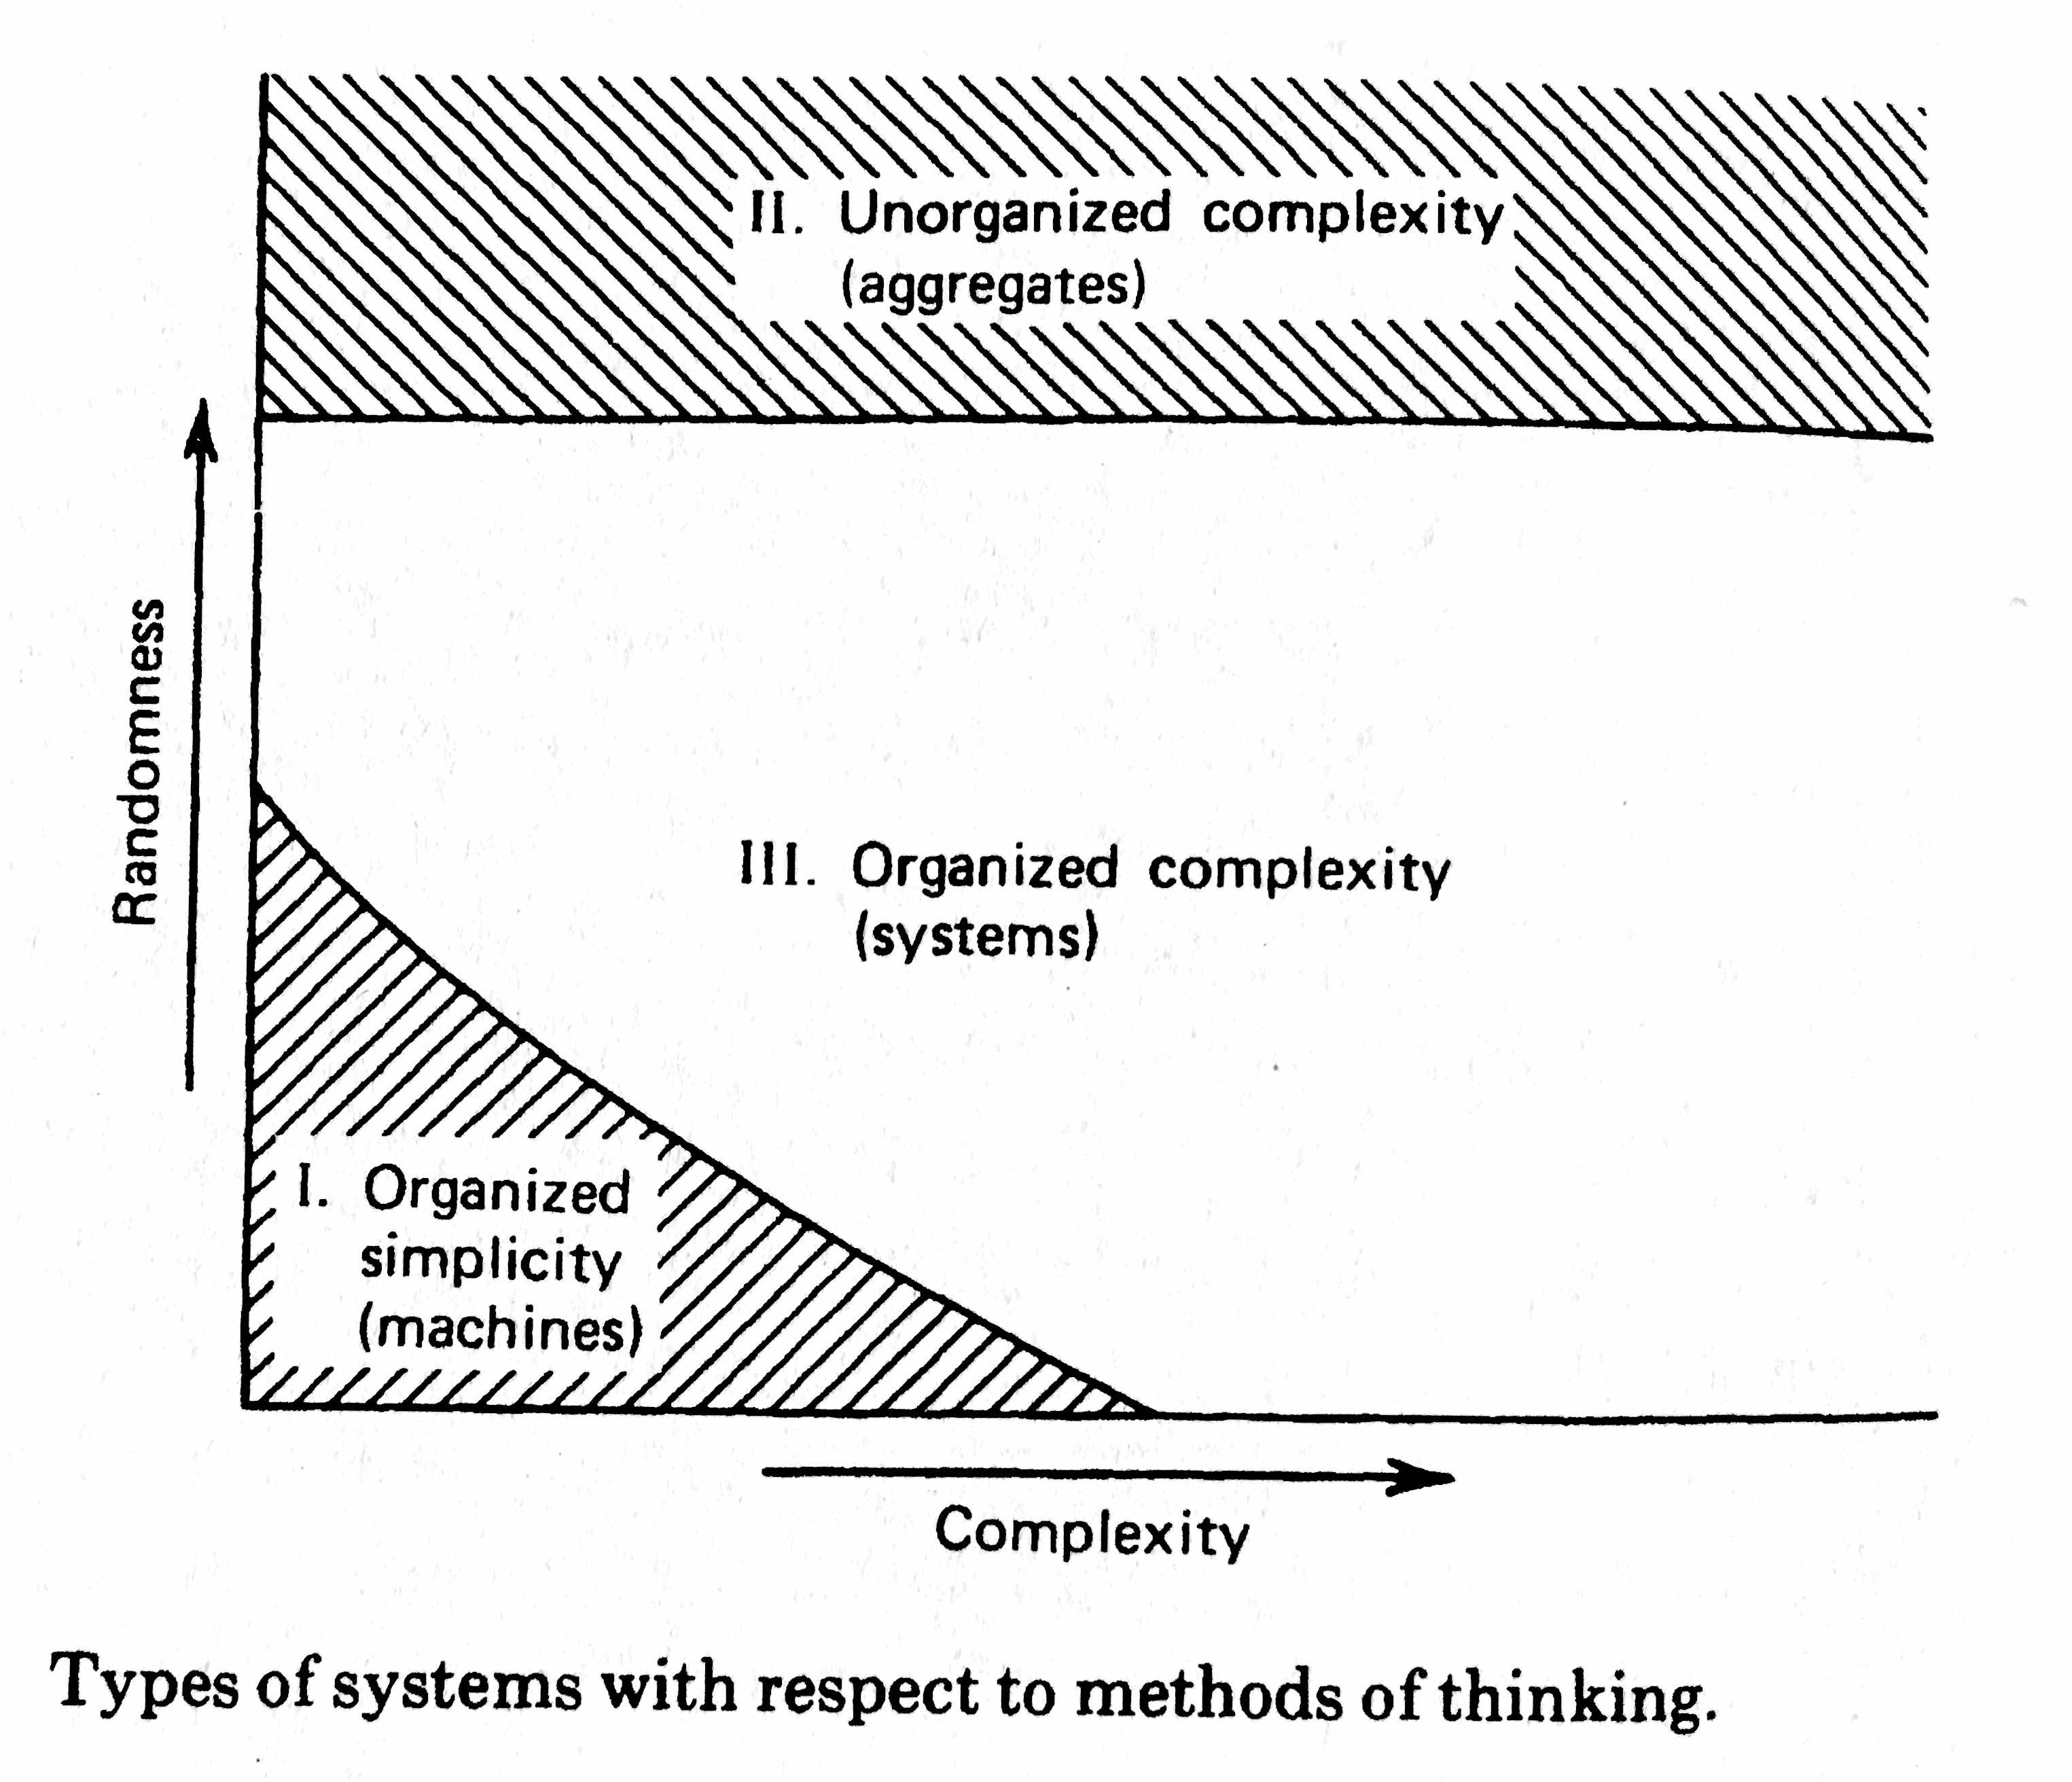 Types of systems with respect to methods of thinking